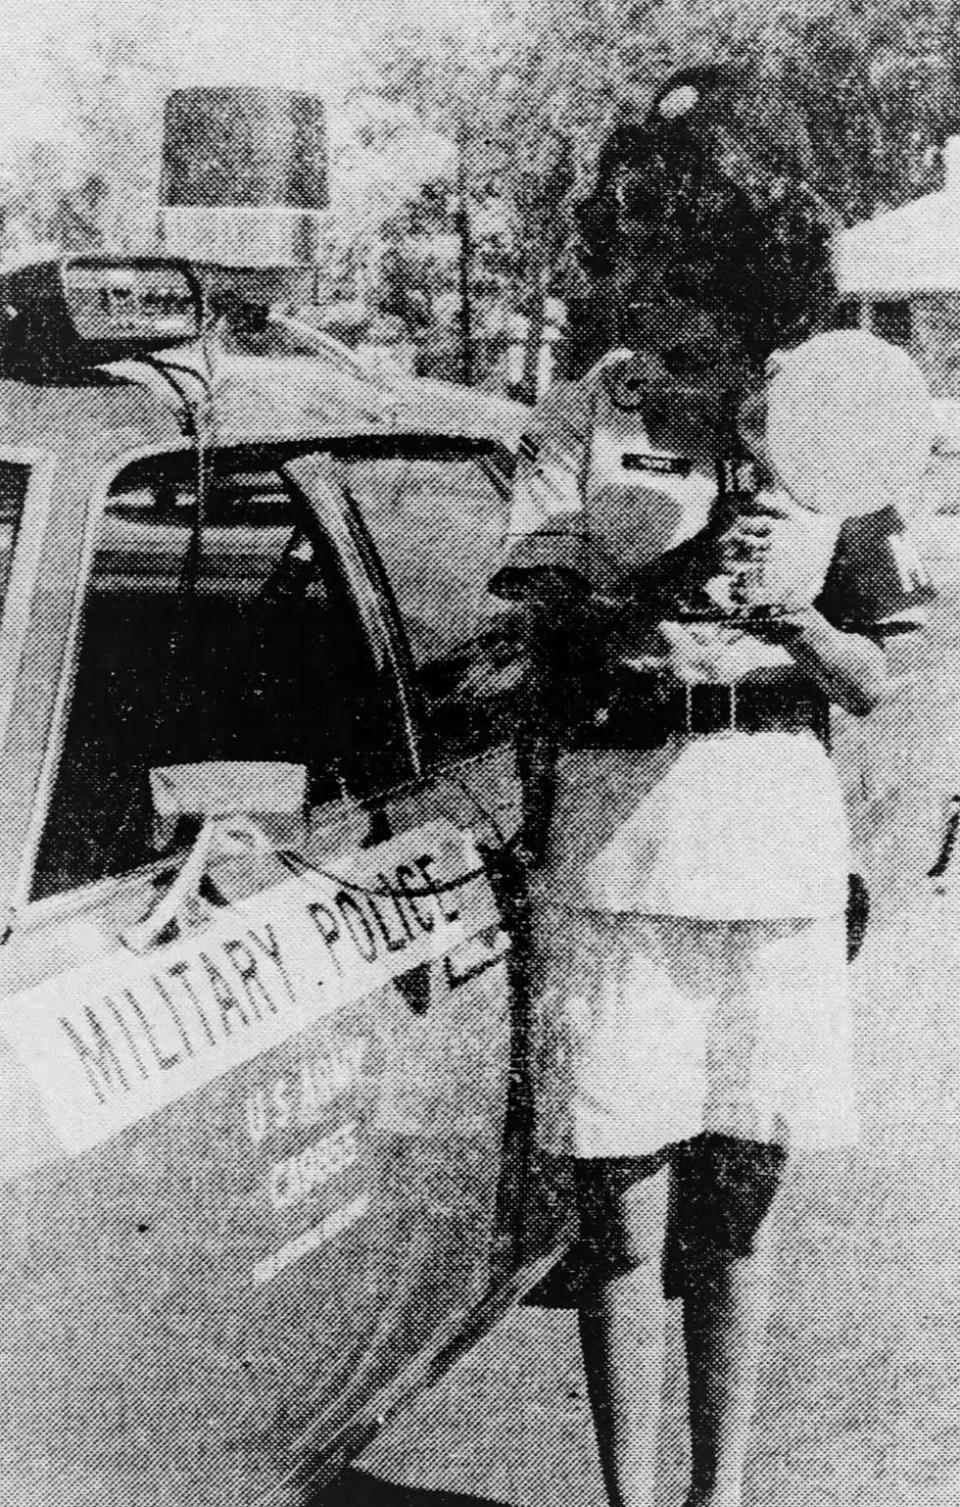 June 12, 1974: Pvt. Natividad S. Perez, member of the Women’s Army Corps, has assumed a position with the Provost Marshal Traffic Control Section.